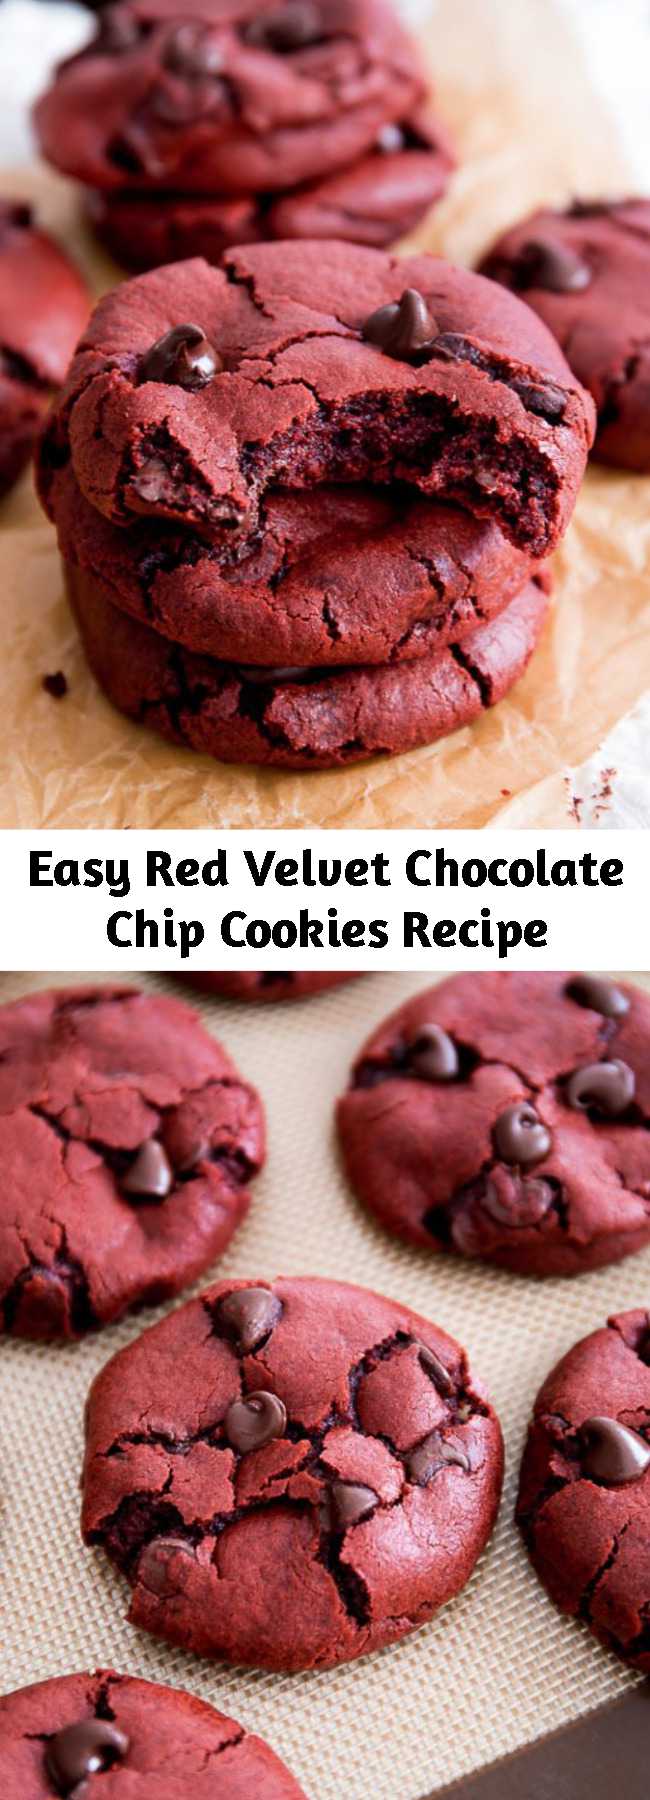 Easy Red Velvet Chocolate Chip Cookies Recipe - Red velvet cake meets a soft-baked chocolate chip cookie today. A blissful marriage of two classic desserts! These are soft-baked red velvet chocolate chip cookie recipe made from scratch.